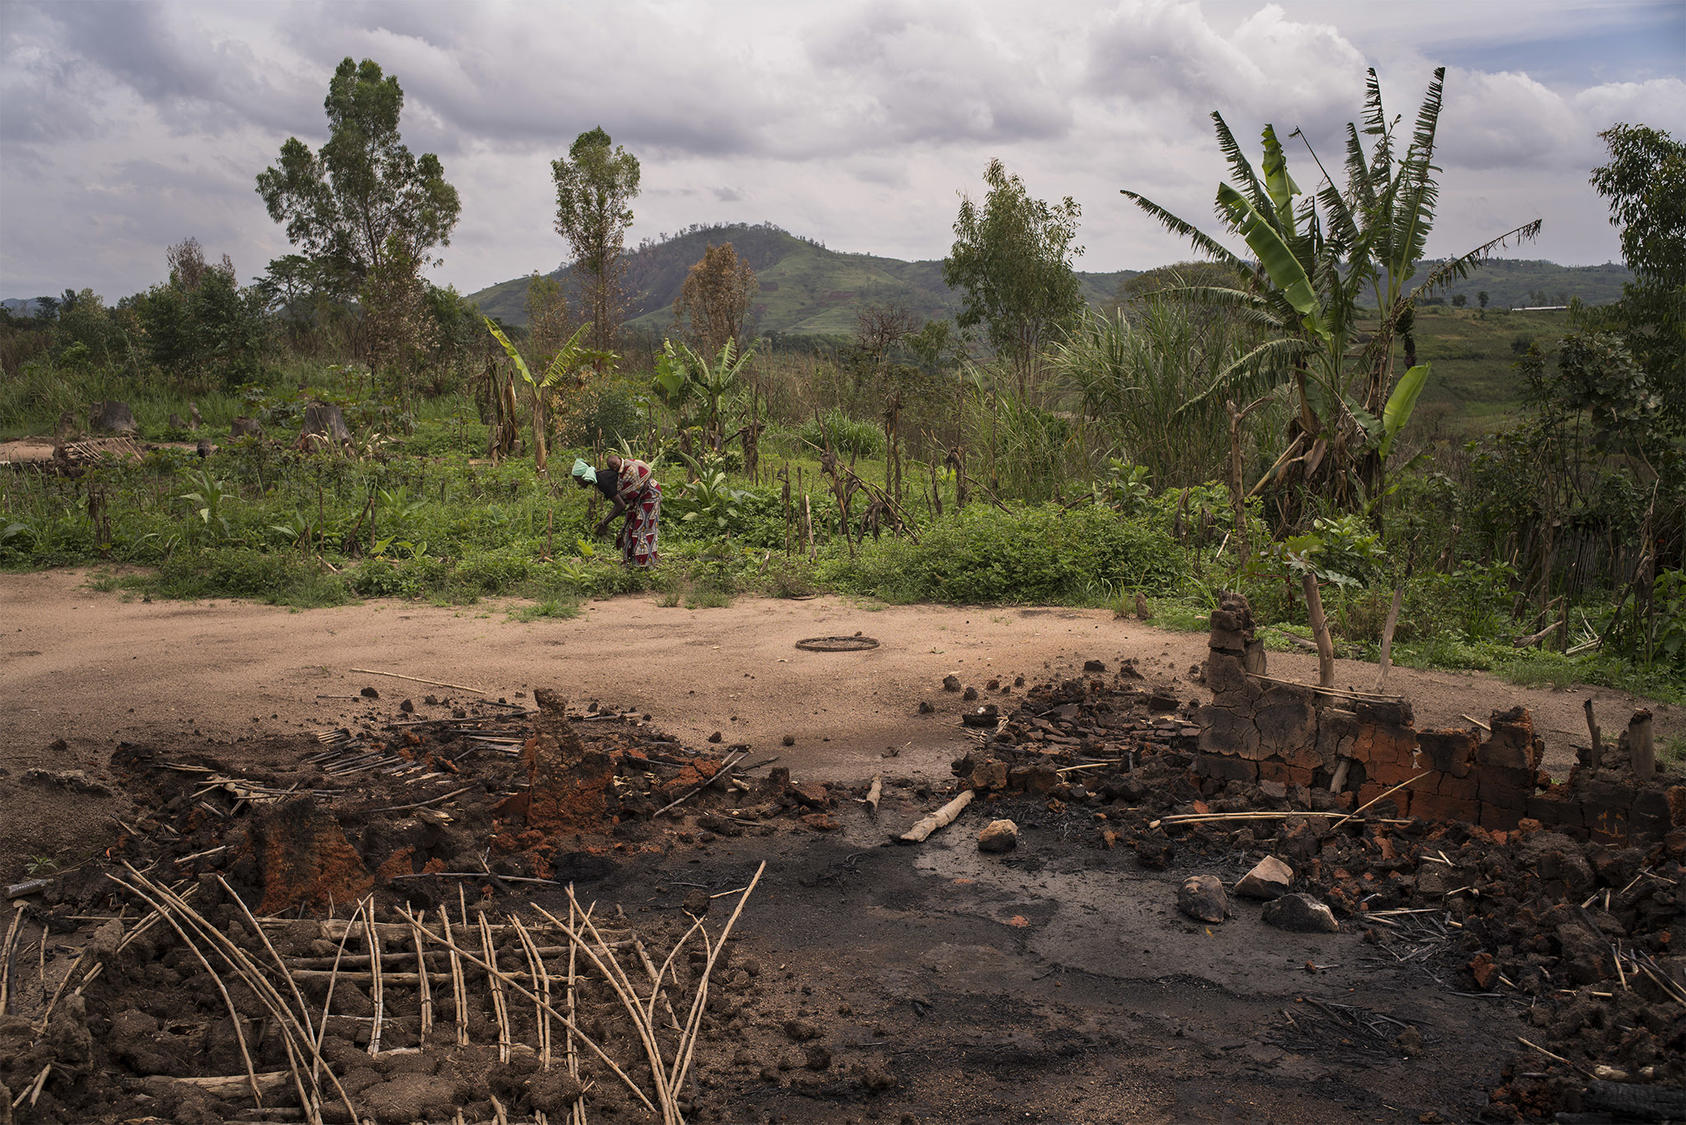 A woman salvages crops near the charred remains of her home, burned amid Ituri’s warfare in 2018. A quarter of the province’s population has been forcibly uprooted in more than 25 years of violence. (Diana Zeyneb Alhindawi/The New York Times)